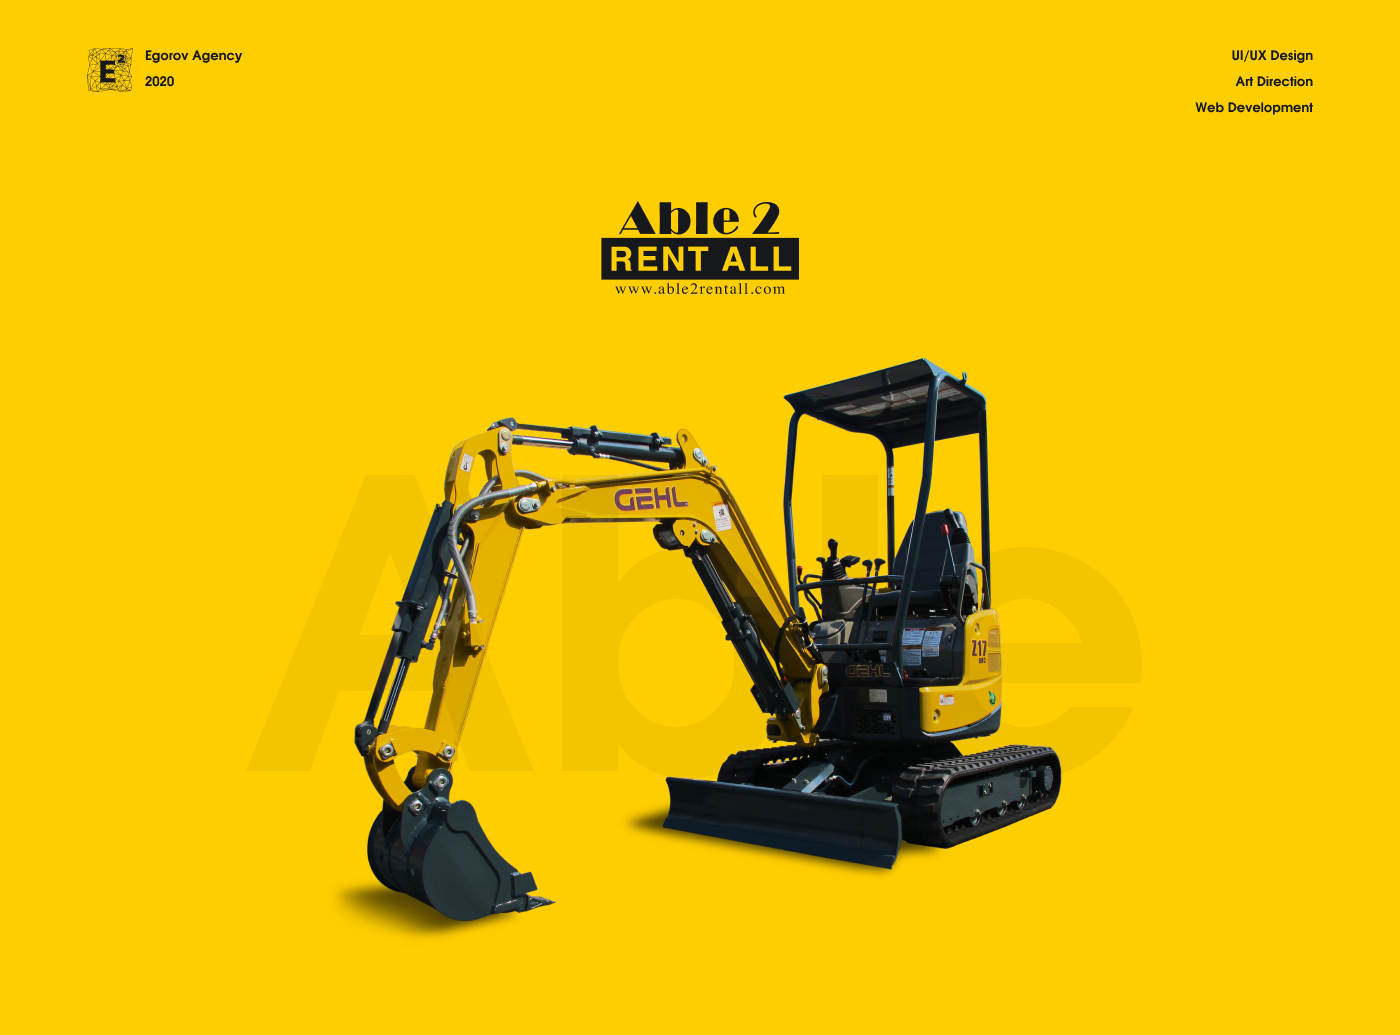 Able 2 Rent All | Corporate | Design